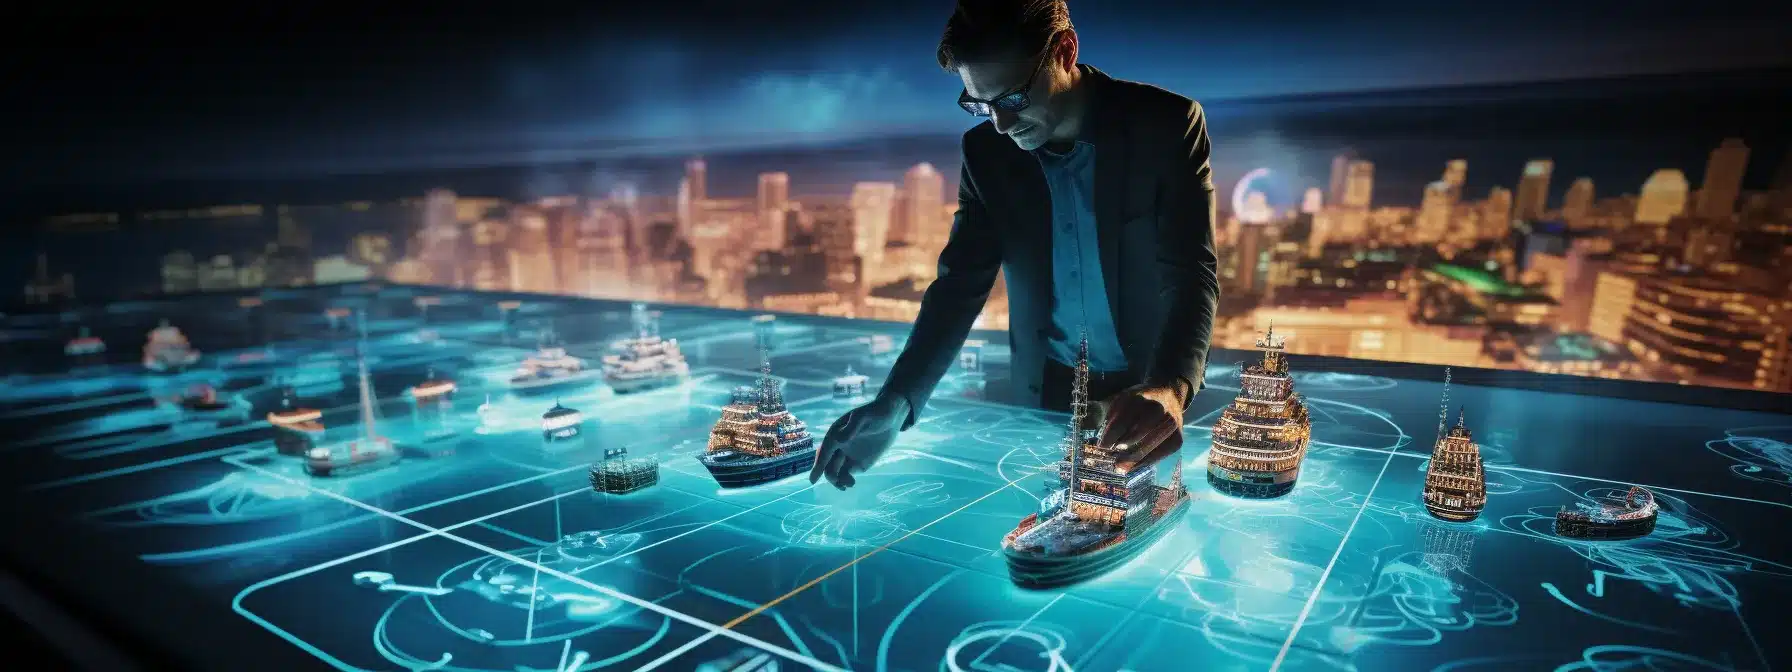 A Marketing Manager Navigating A Ship Through The Waters Of Digital Media And Brand Strategy, With Social Media Platforms Represented As Islands In The Distance.